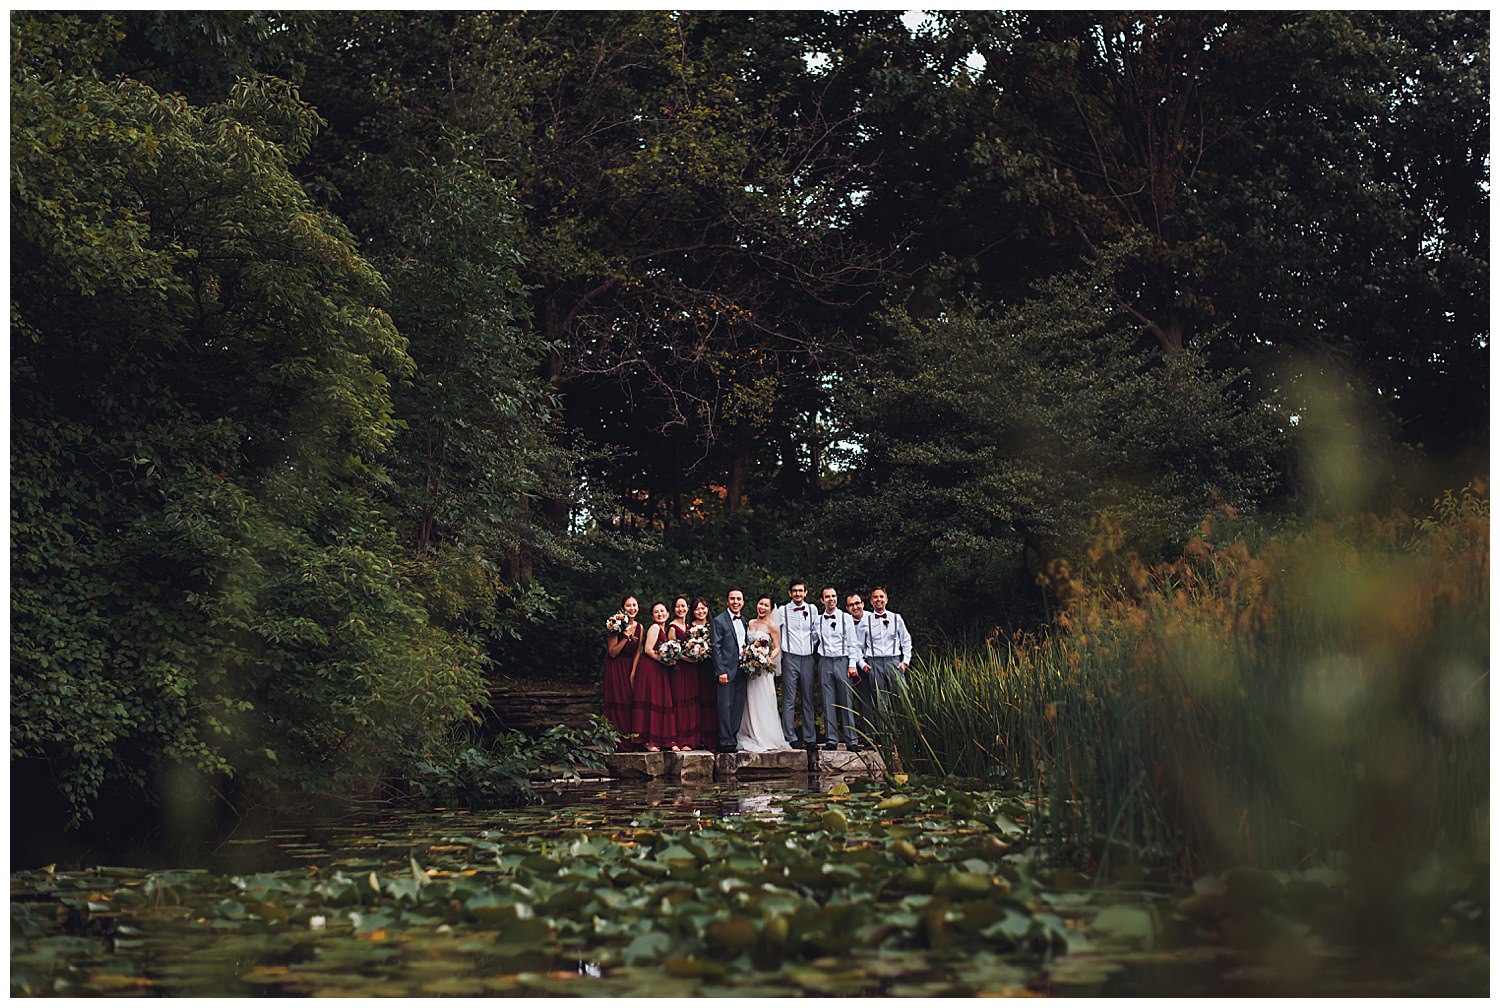 Columbus Park Refectory Wedding, photo of a bridal party overlooking a pond